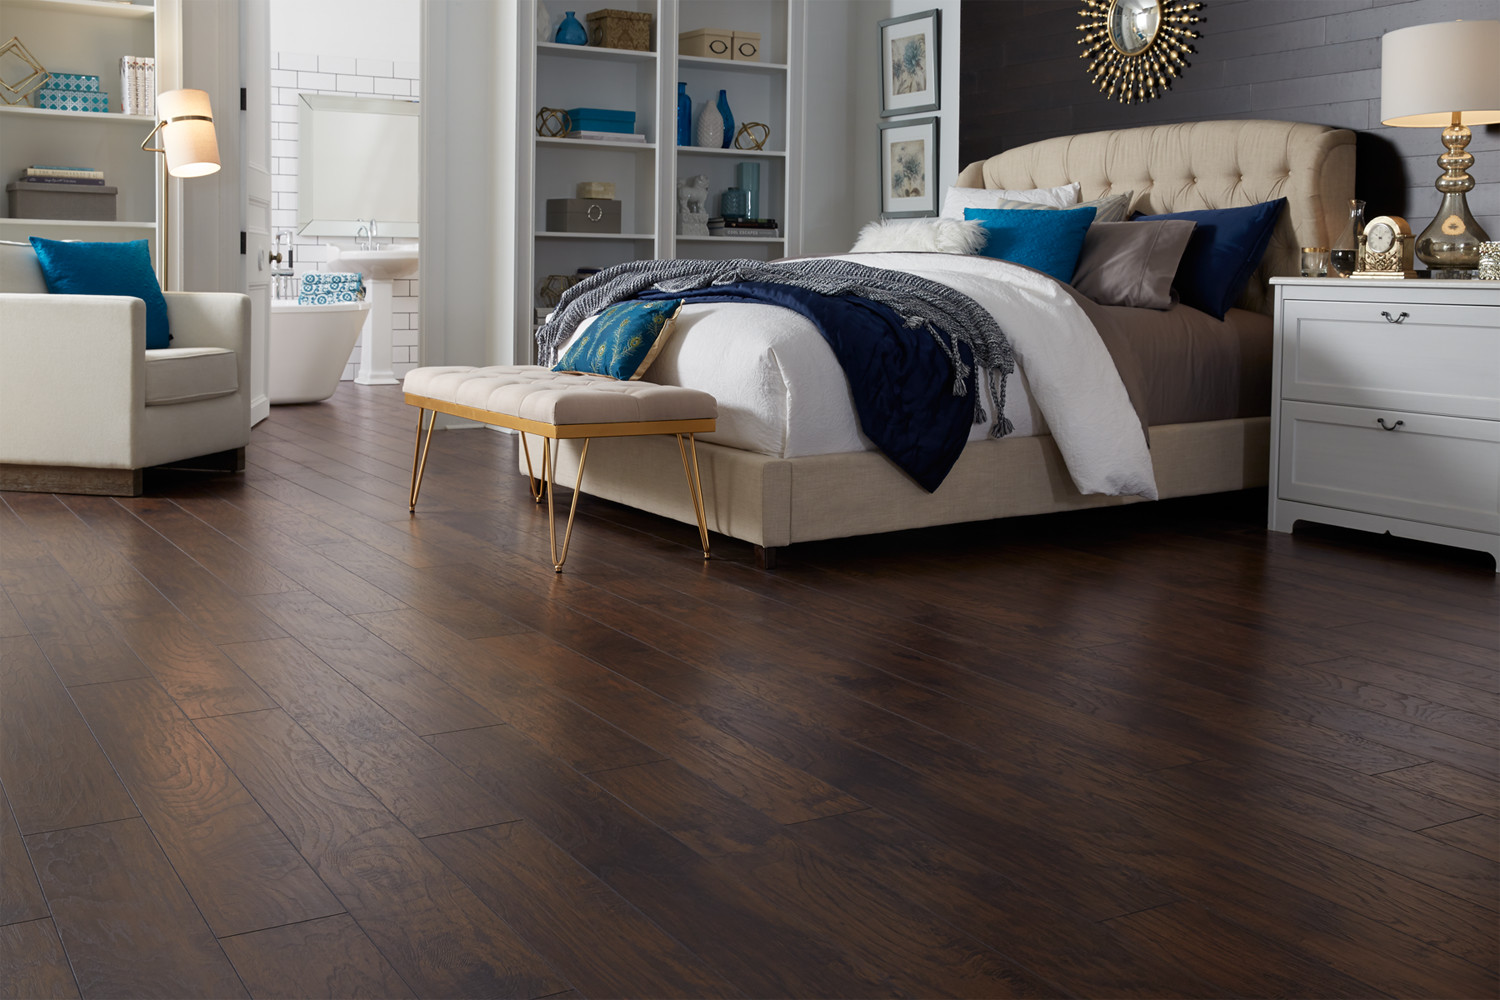 15 Lovable Bruce Hickory Hardwood Flooring Reviews 2024 free download bruce hickory hardwood flooring reviews of commonwealth hickory dream home ultra x2o laminate floors inside commonwealth hickory dream home ultra x2o laminate